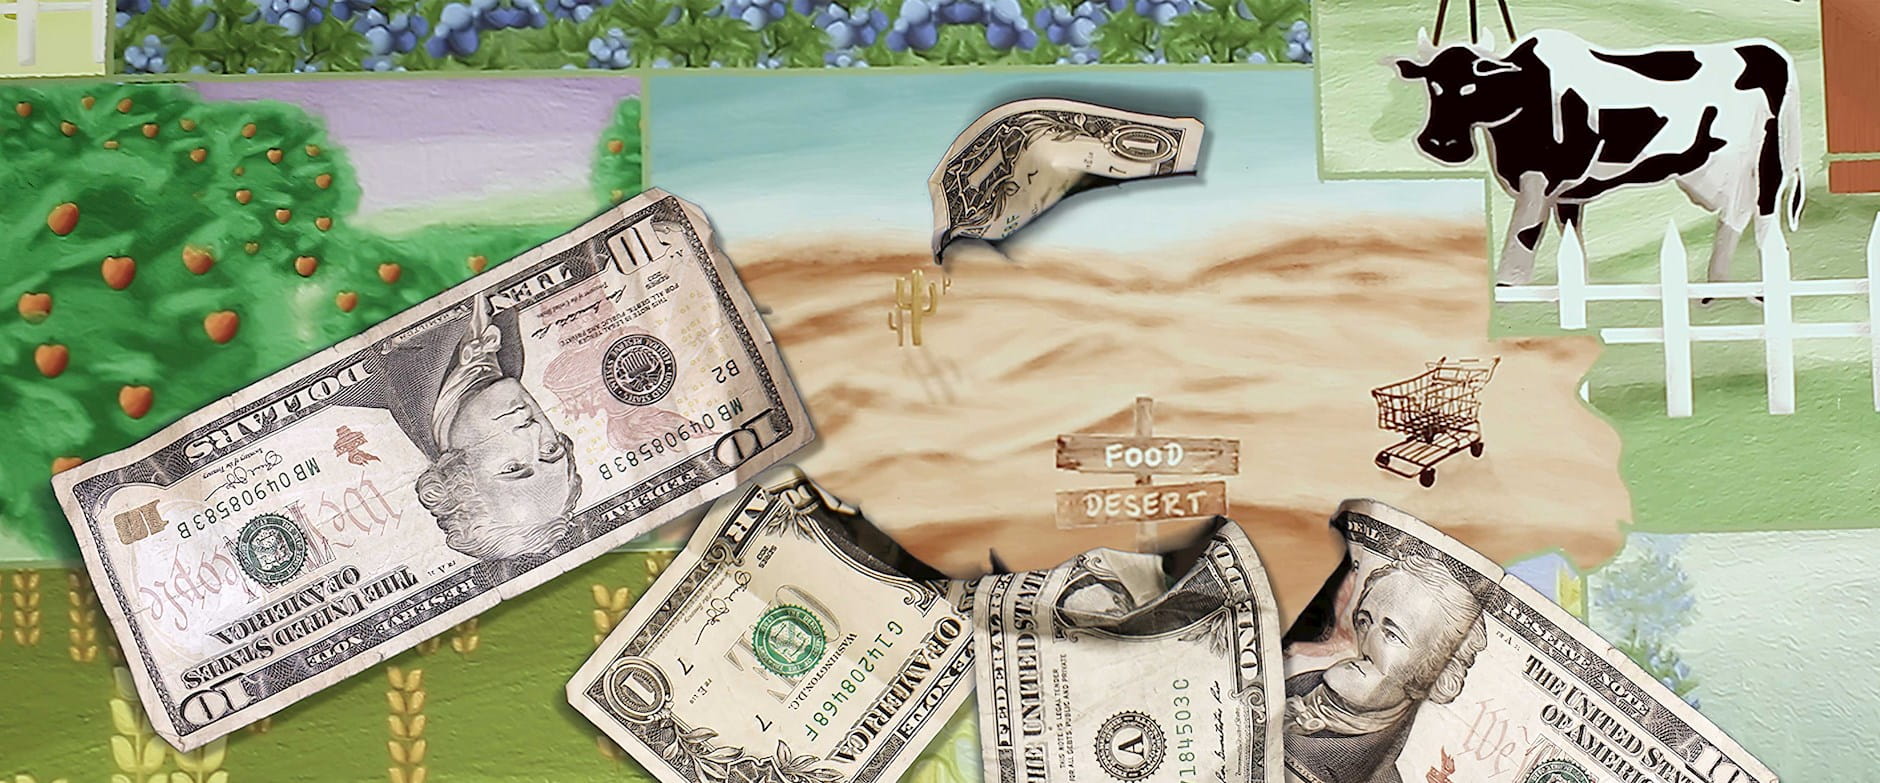 Dollars and a cow around sand